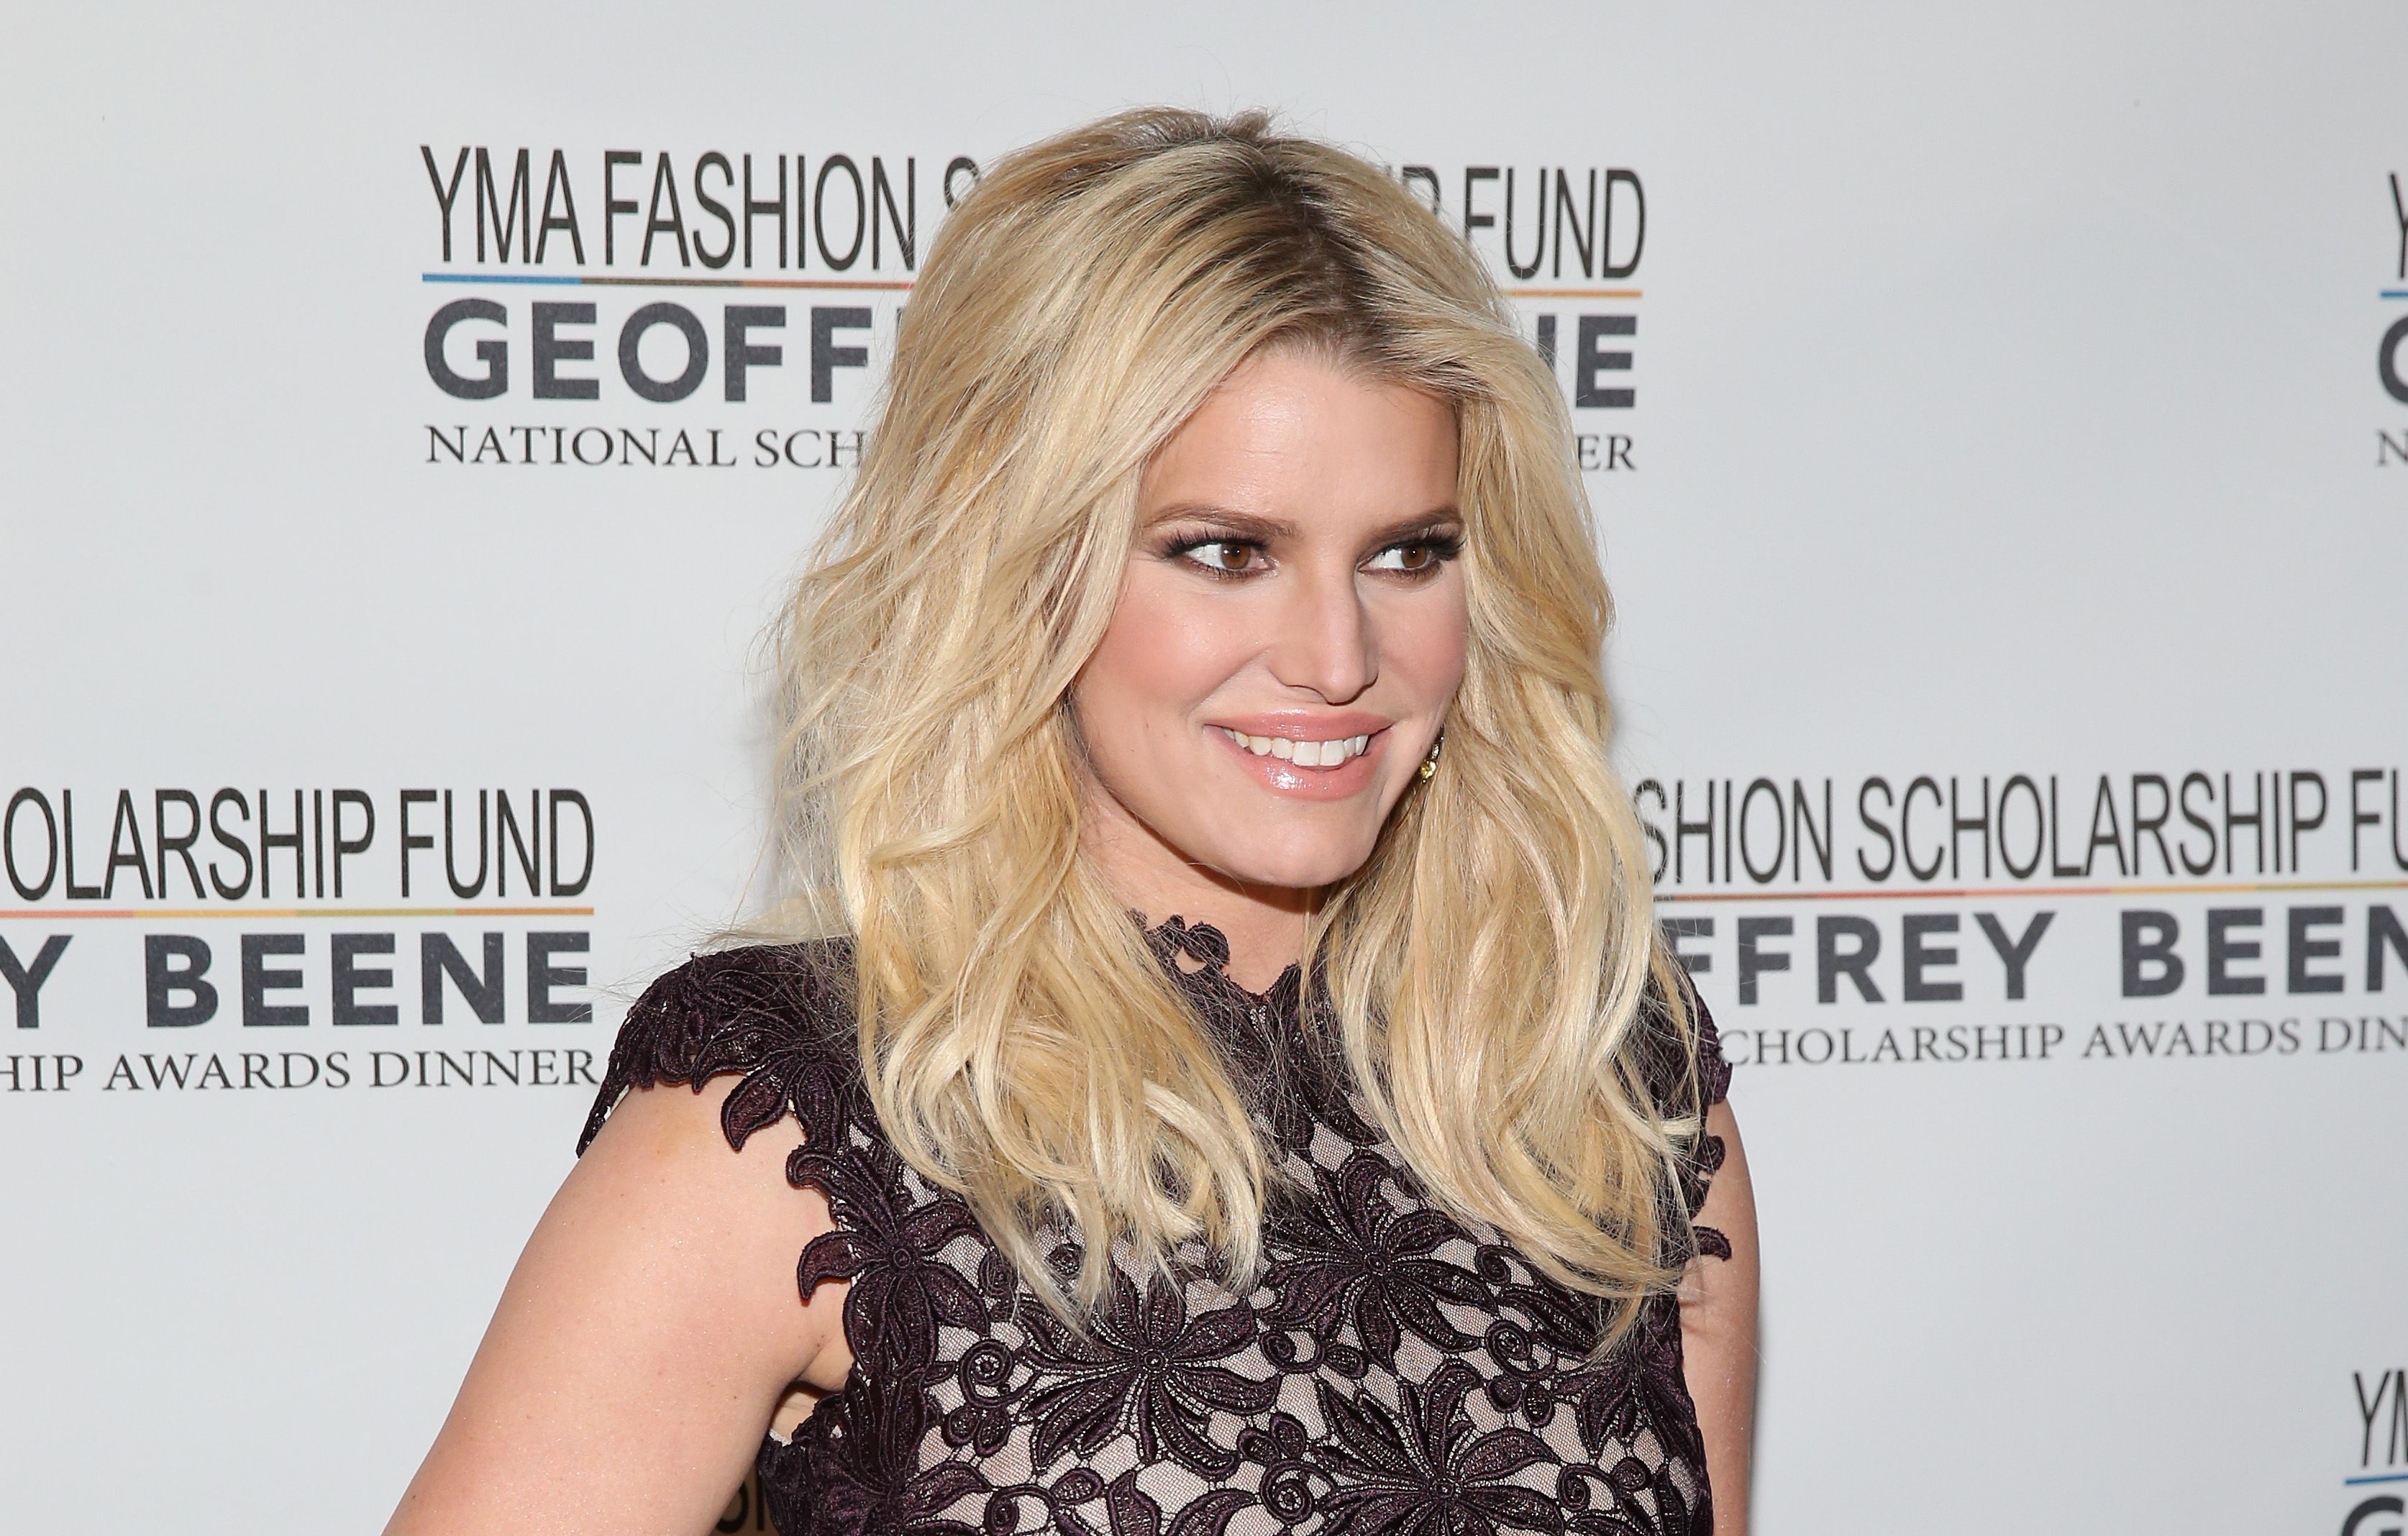 Jessica Simpson at YMA Fashion Scholarship Fund Geoffrey Beene National Scholarship Awards Gala at Marriott Marquis Hotel on January 12, 2016 | Photo: Getty Images